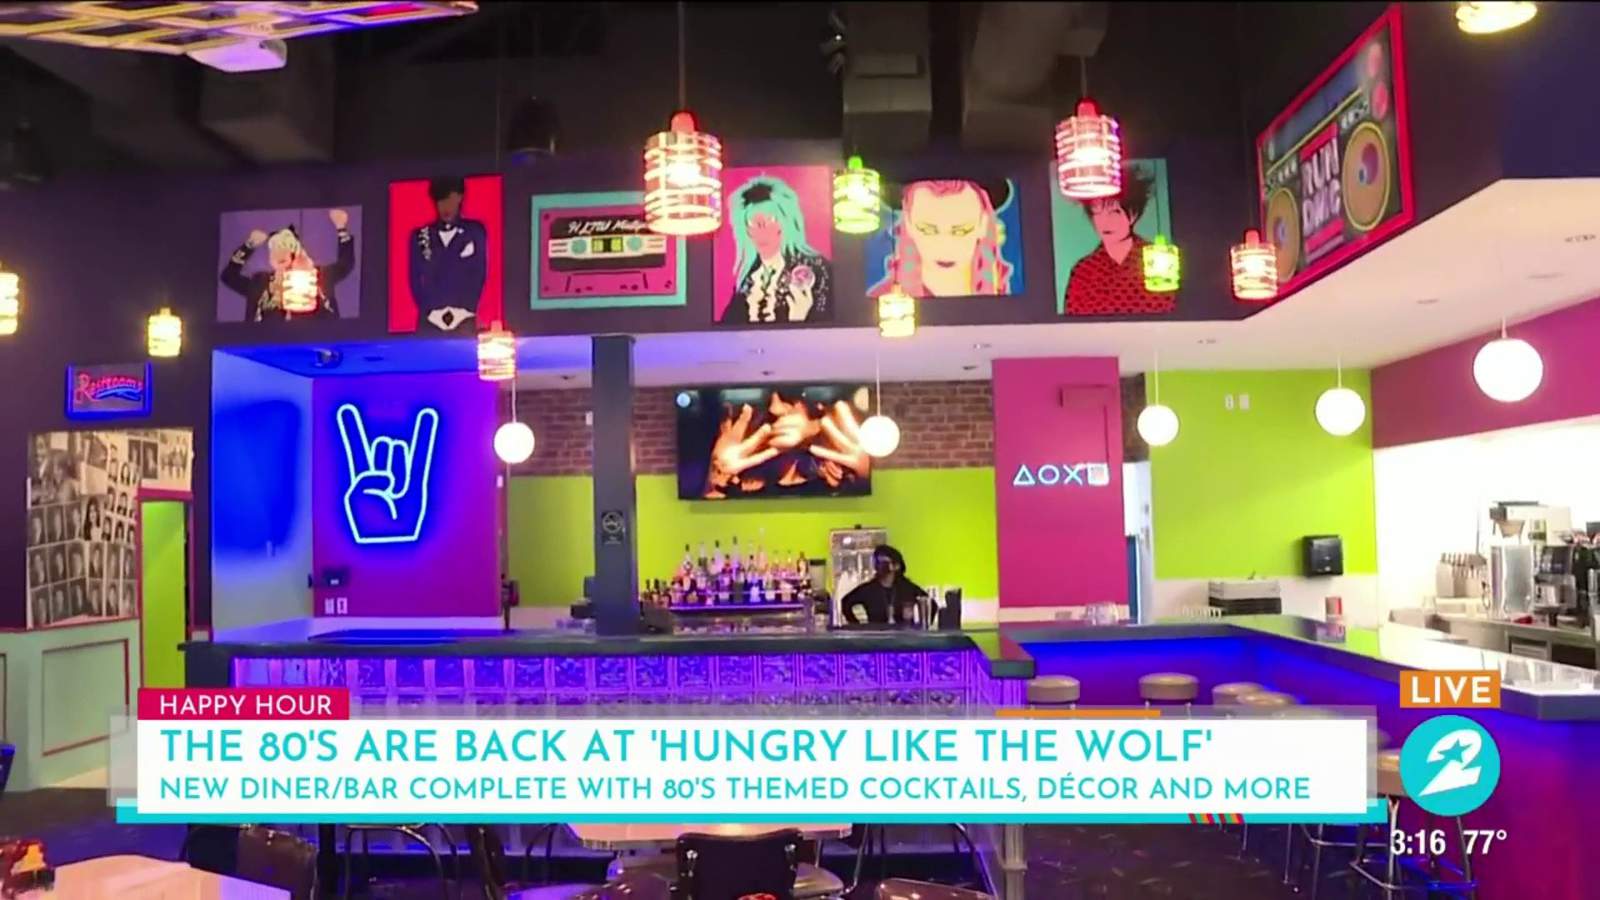 Houston’s only ’80s themed diner and bar ‘Hungry Like the Wolf’ now open in The Heights